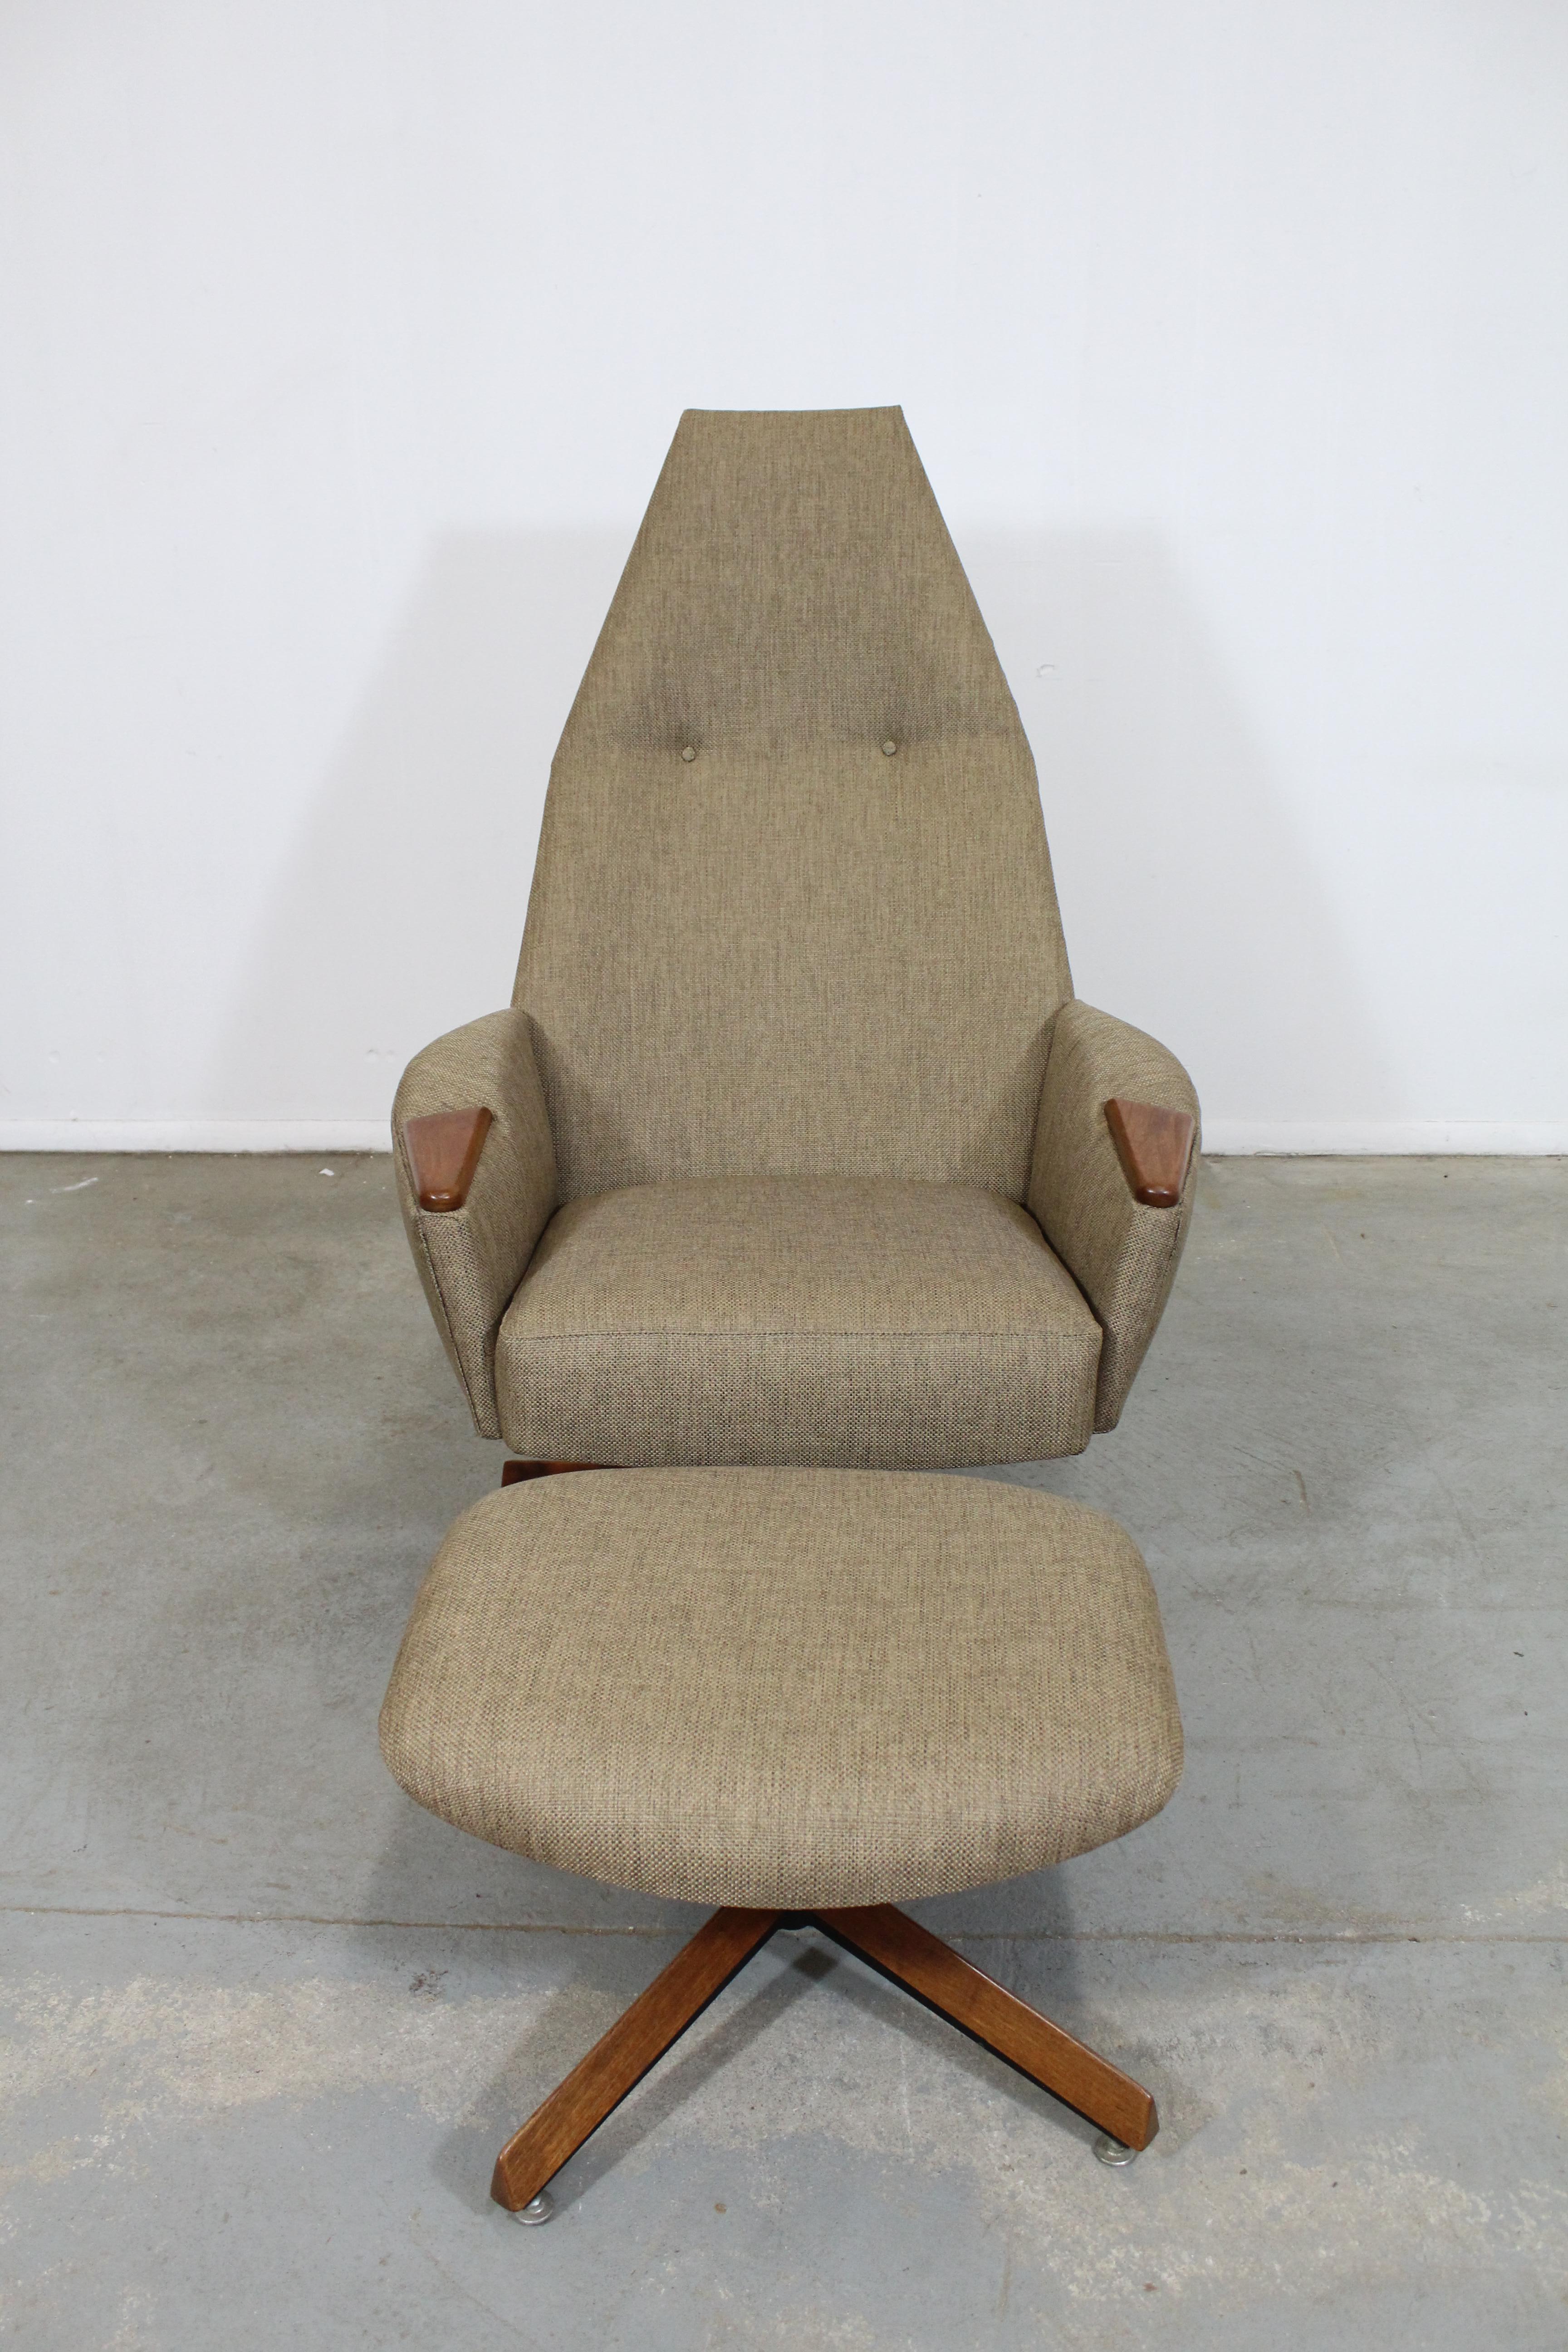 American Mid-Century Modern Adrian Pearsall for Craft Assoc. Lounge Chair and Ottoman